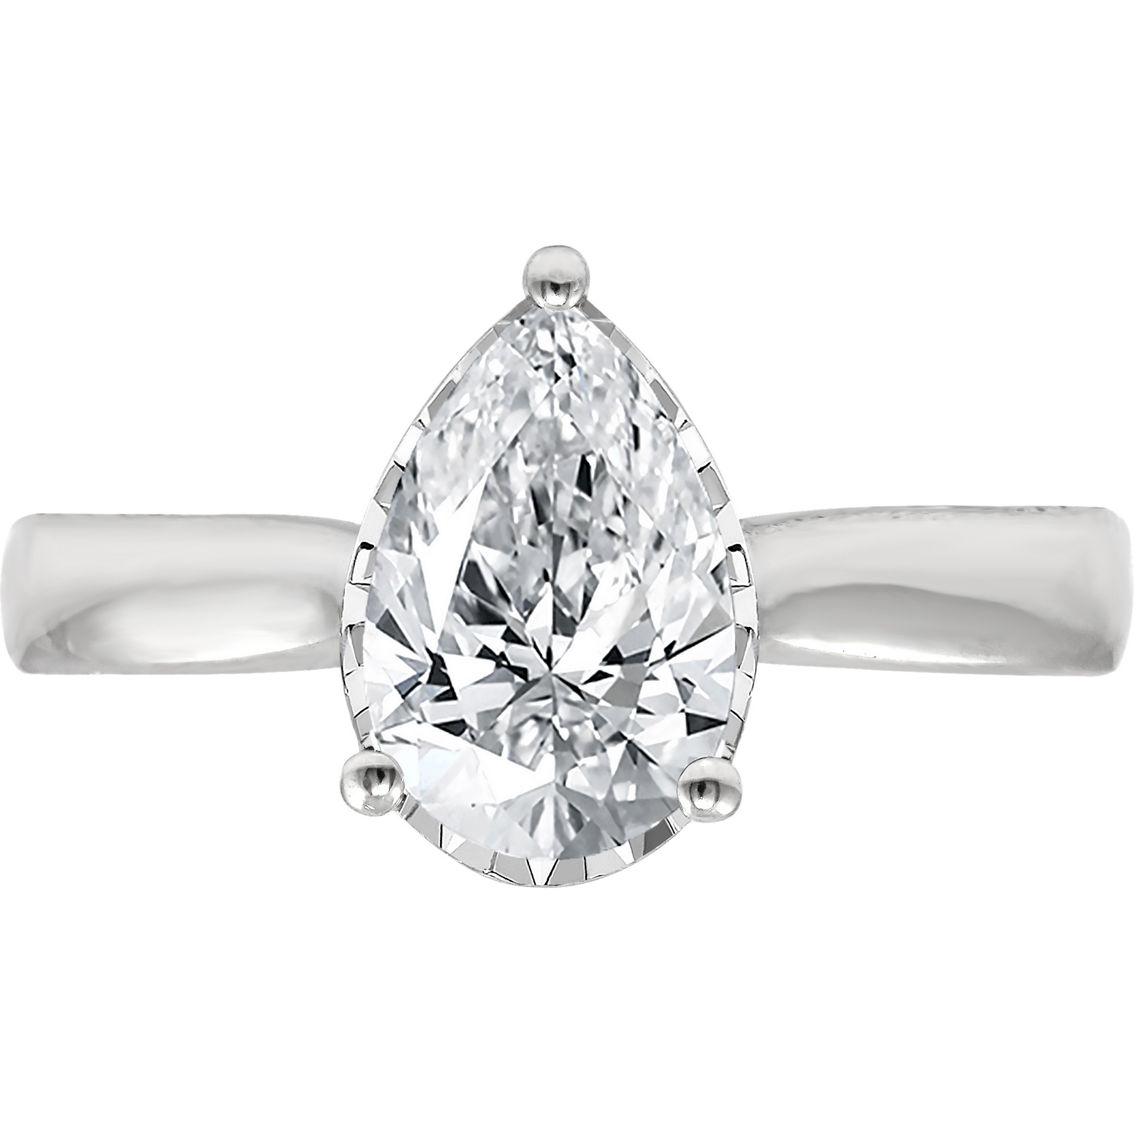 Ray of Brilliance 14K White Gold 2 CTW IGI Certified Lab Grown Diamond Ring Size 7 - Image 2 of 2